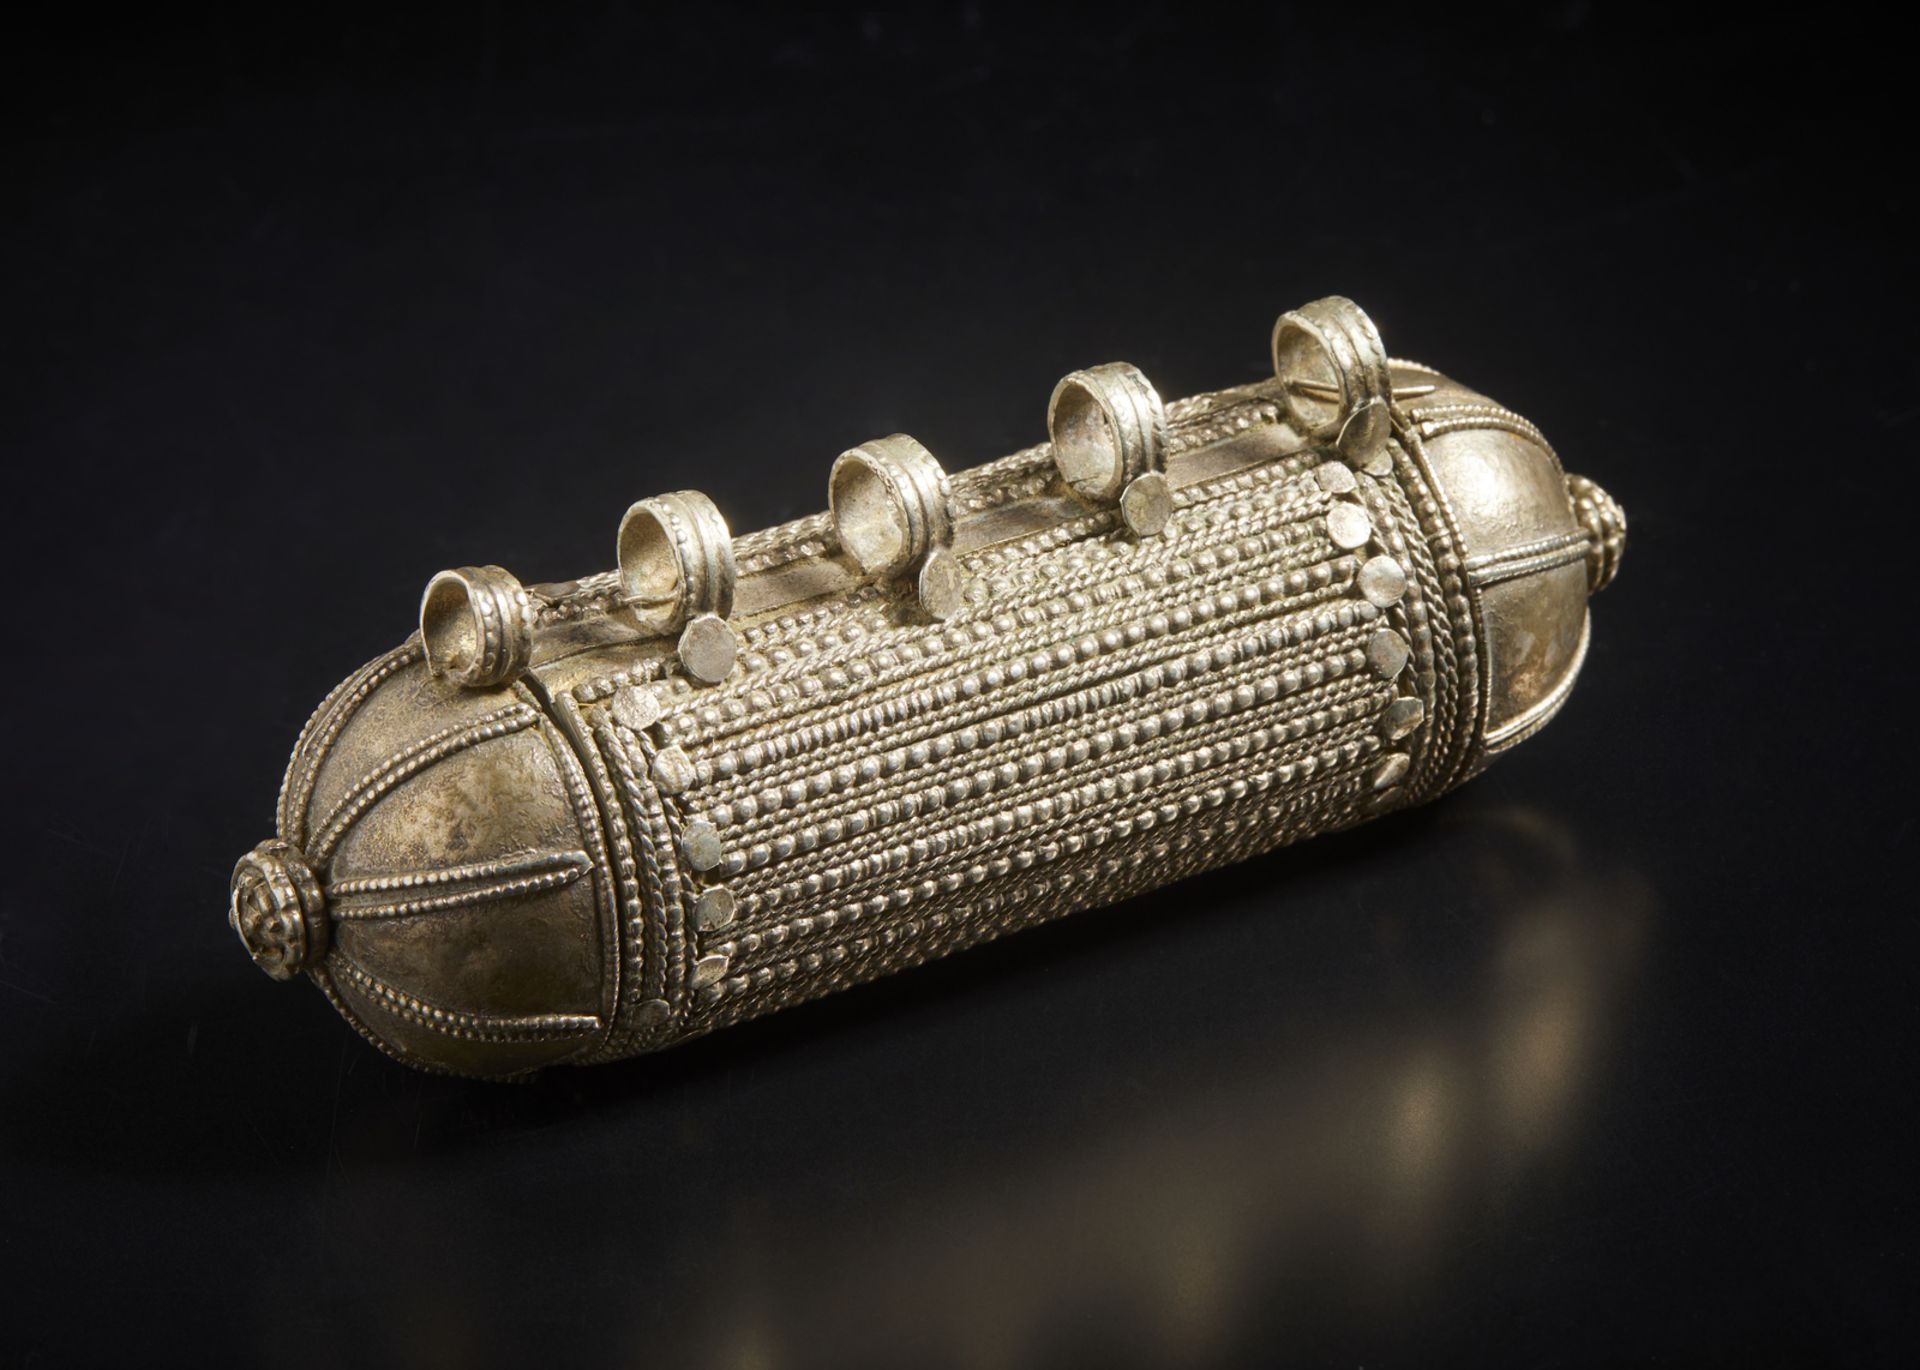 A large silver amulet Yemen, 19th century Cylindrical box with talismanic function, used to hold